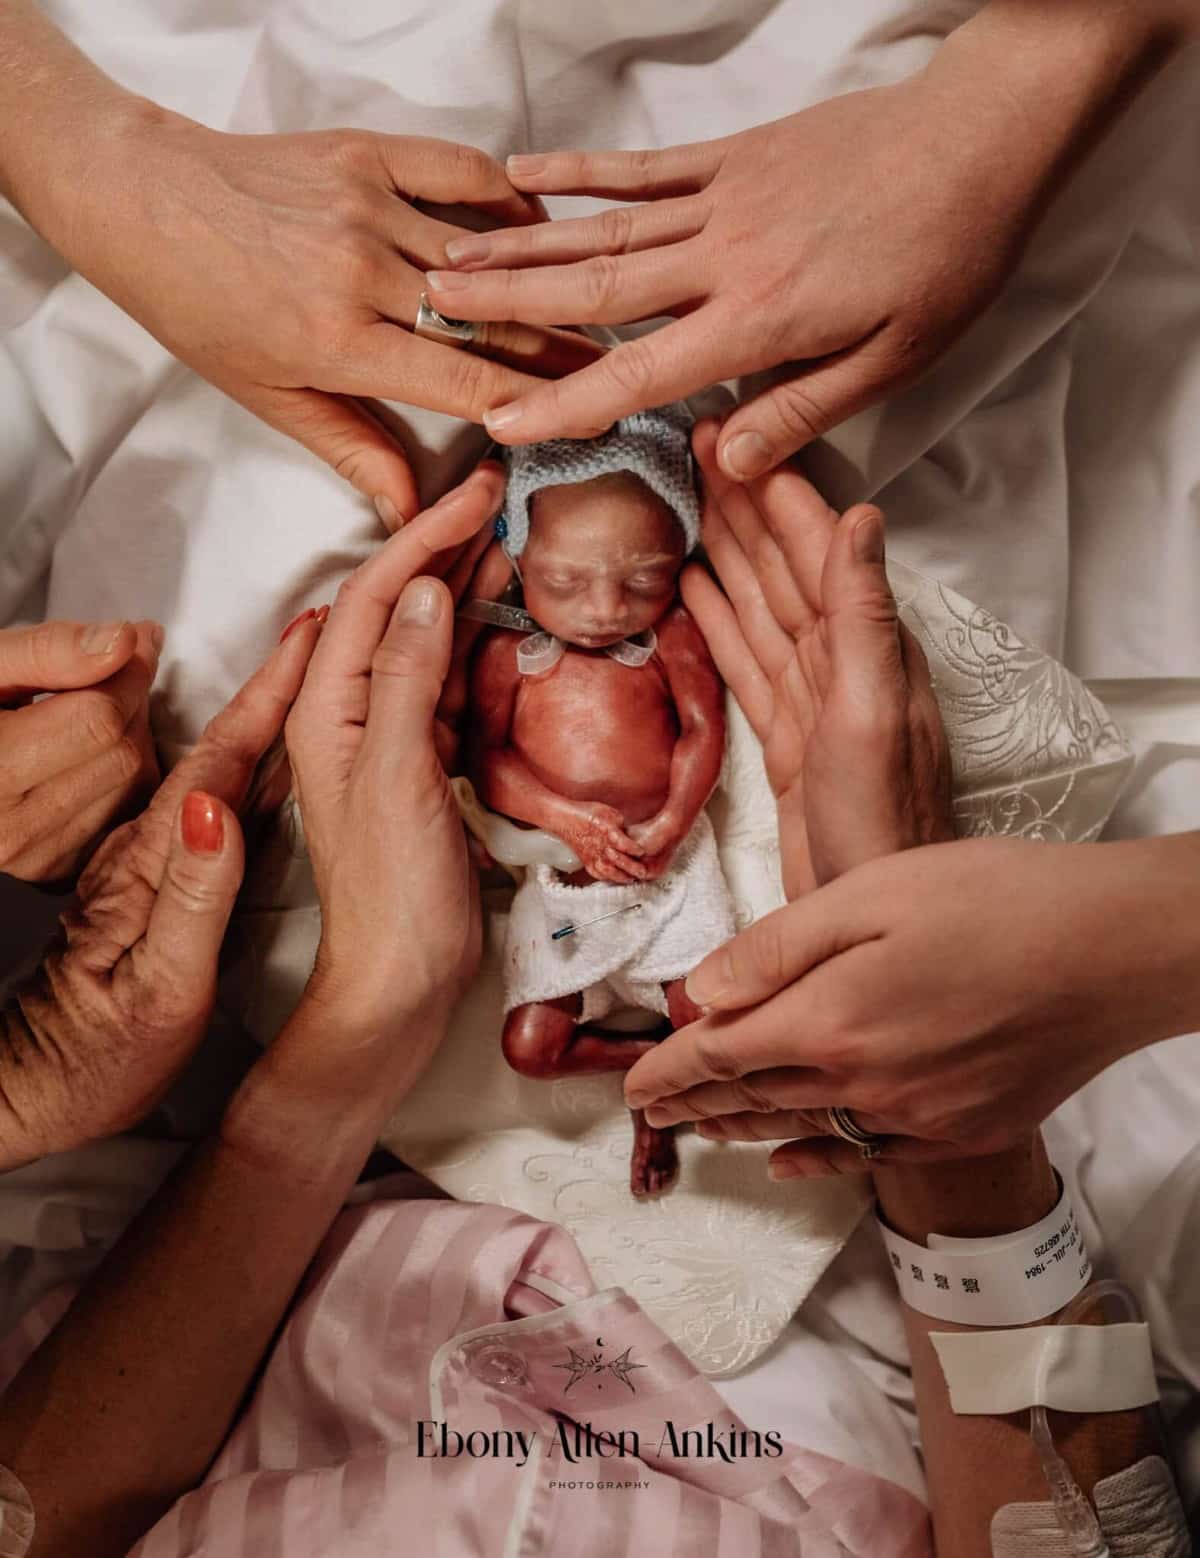 IAPBP Annual Birth Photography Competition